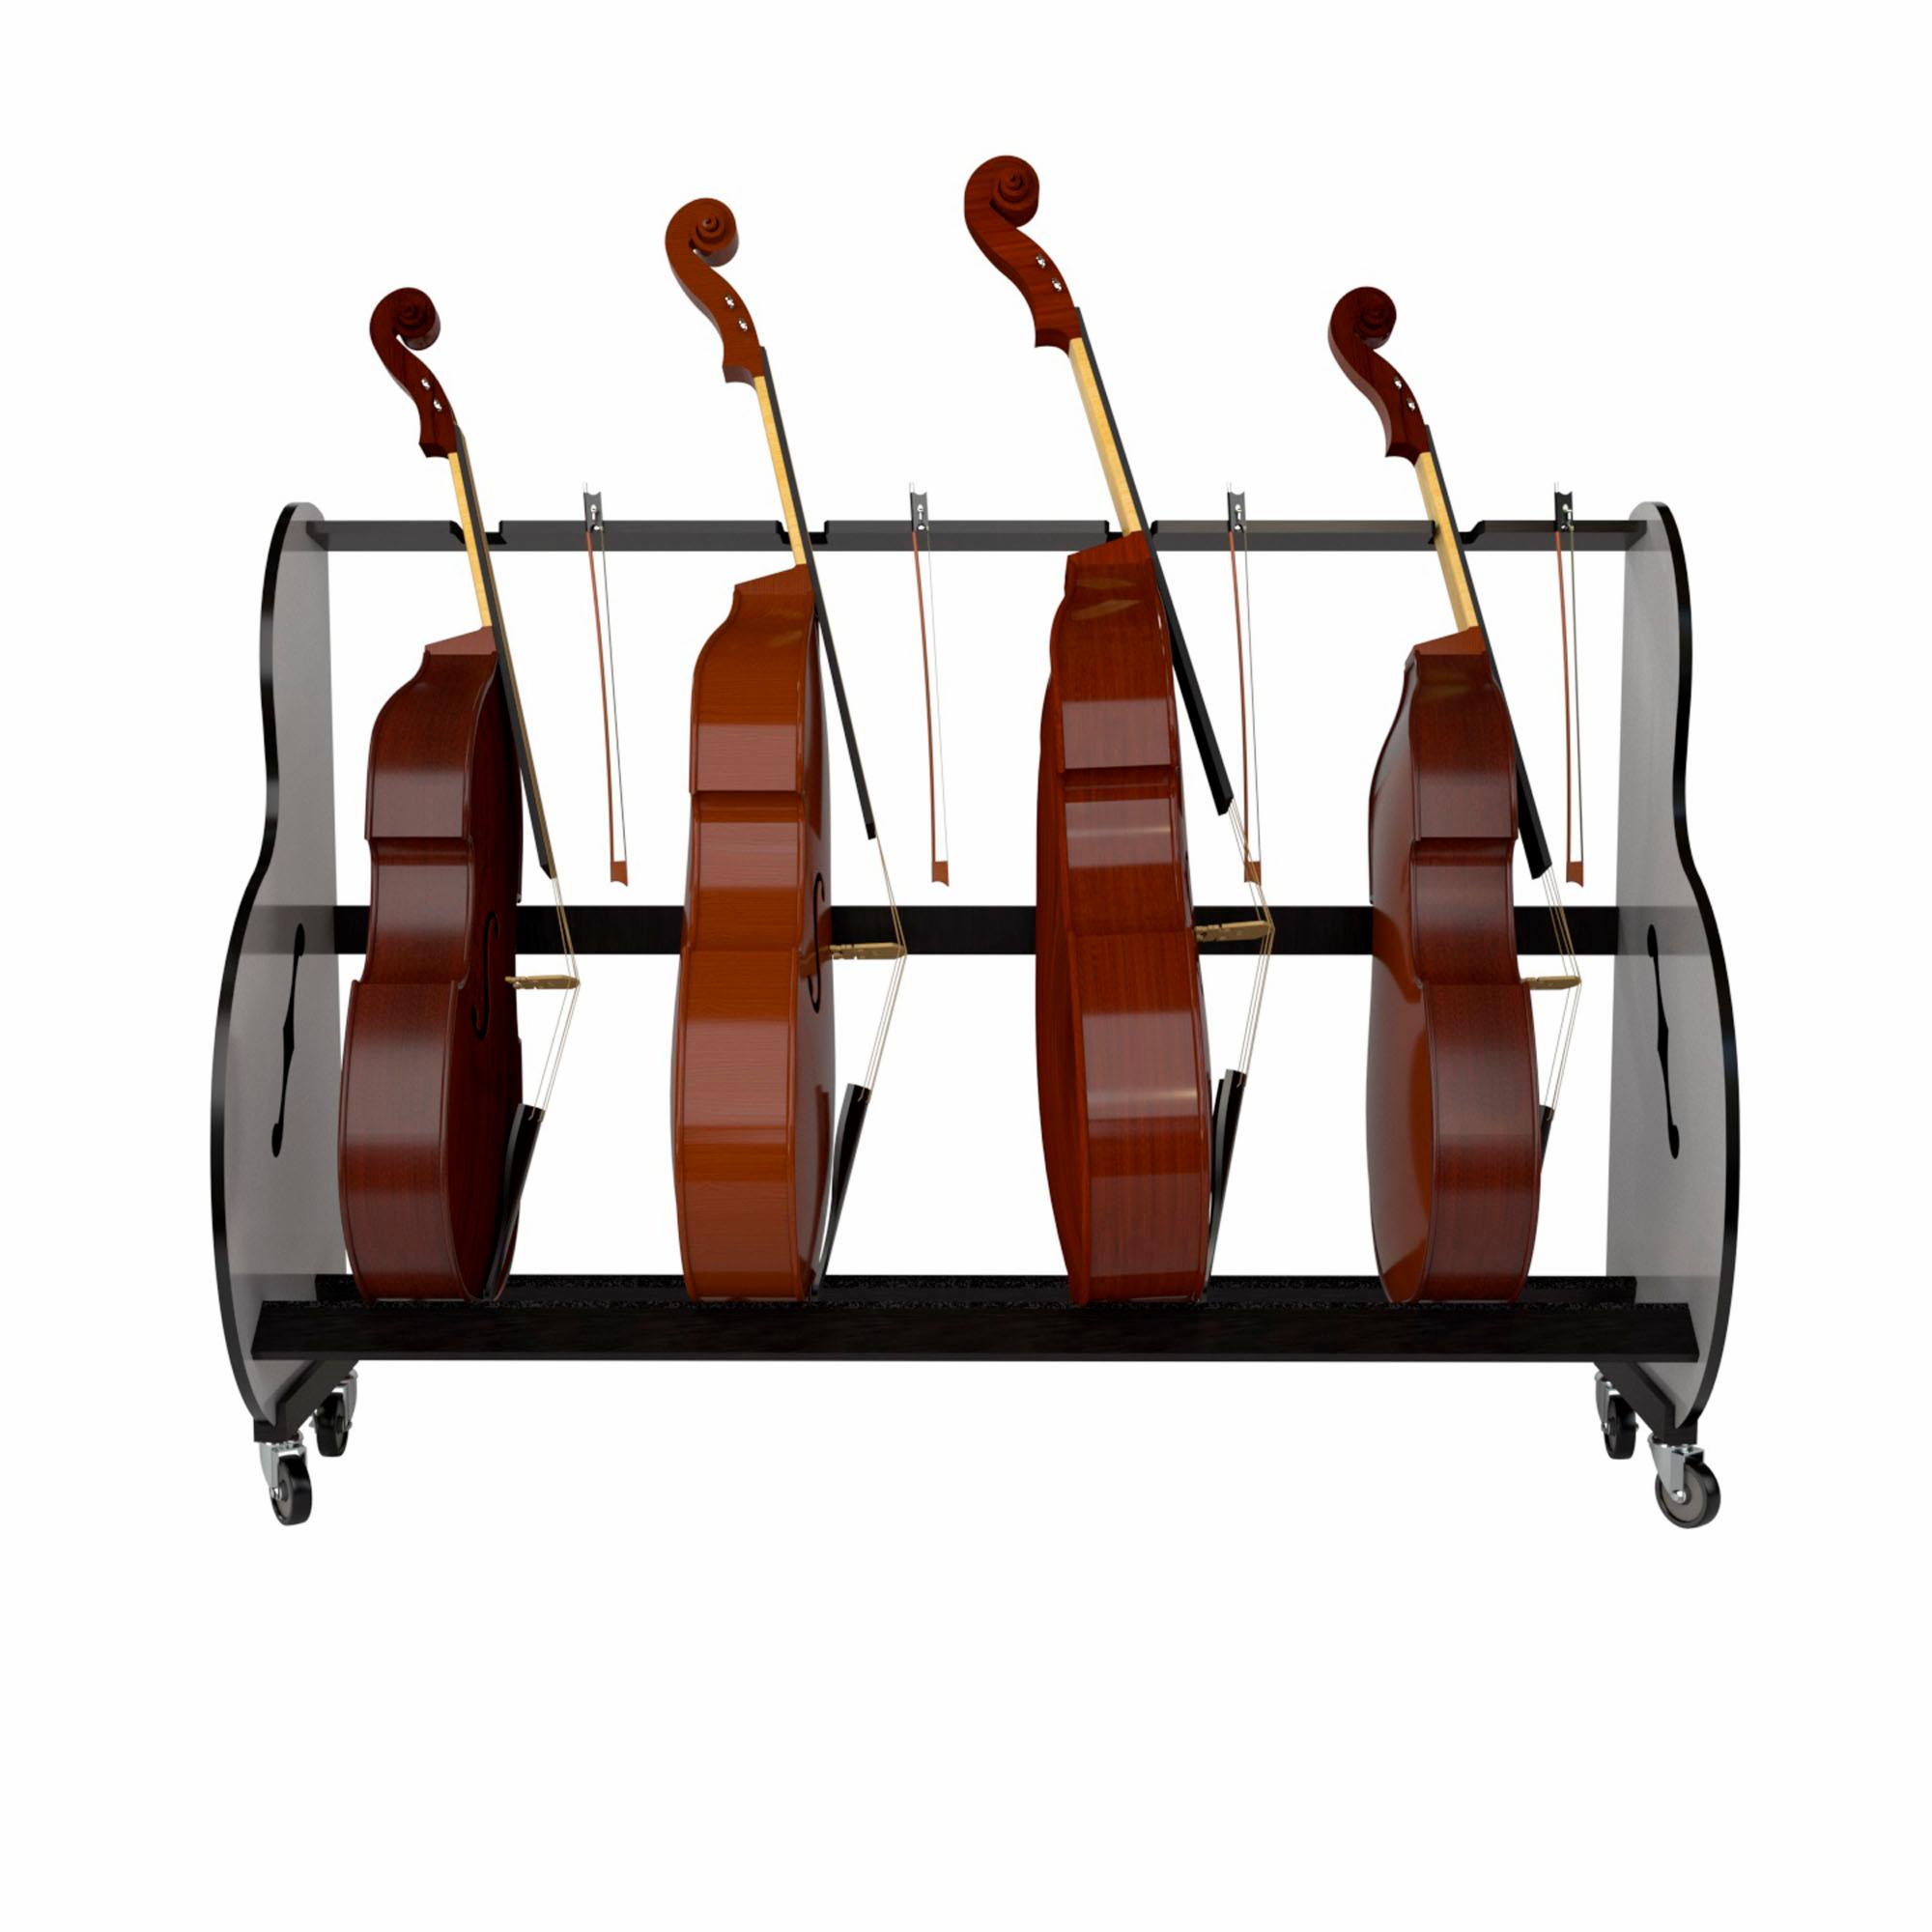 A&S Crafted Products Band Room Bass Rack Instrument Stand